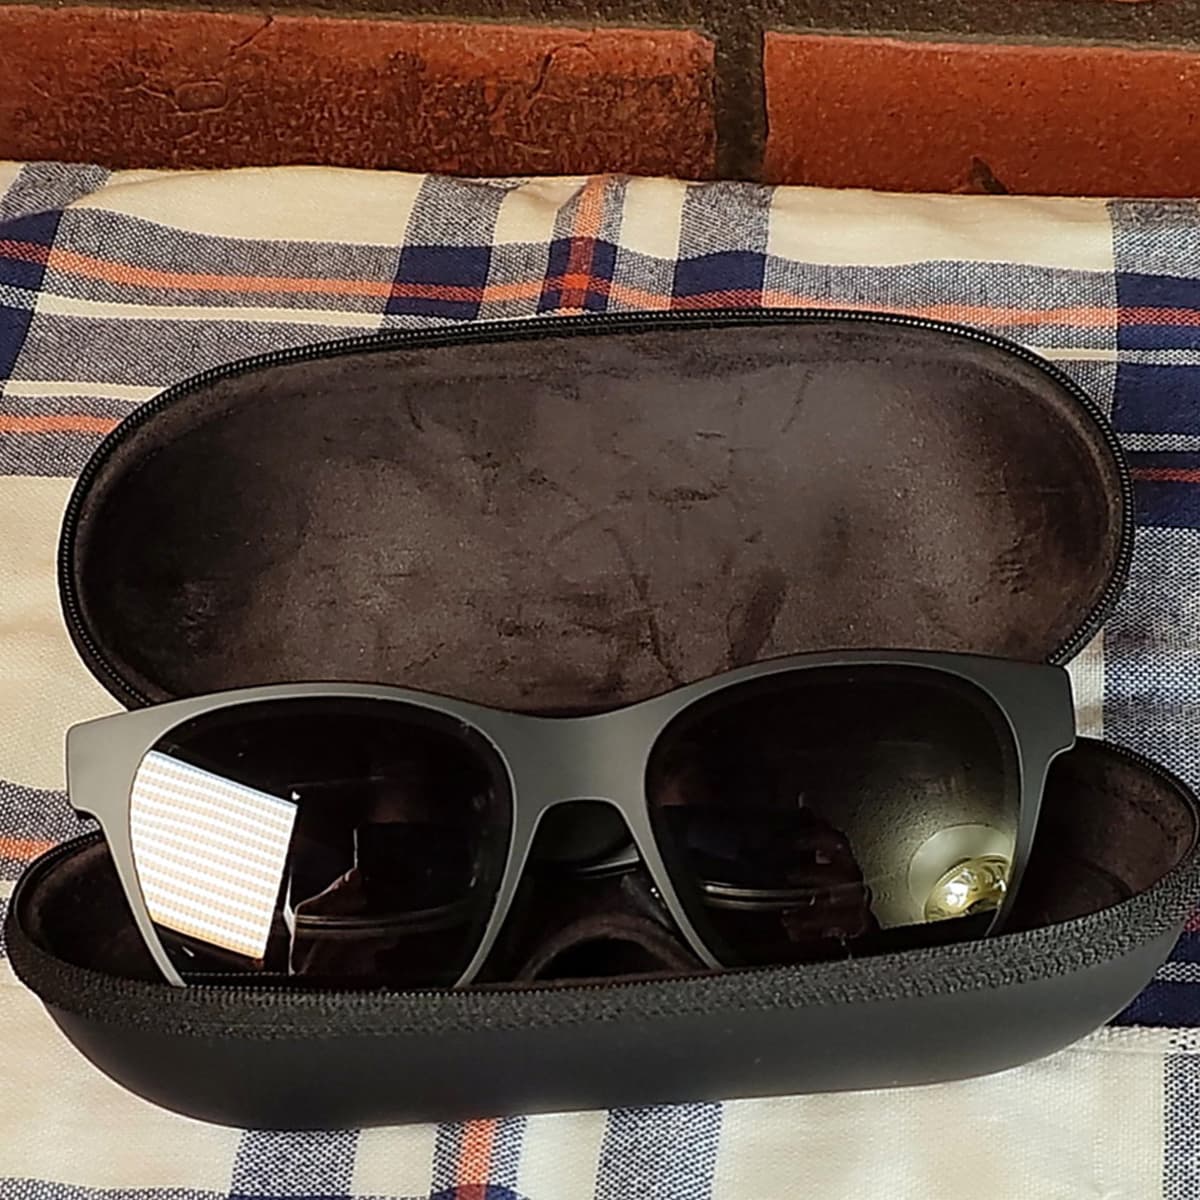 Review of the Nreal Air Augmented Reality Glasses - TurboFuture